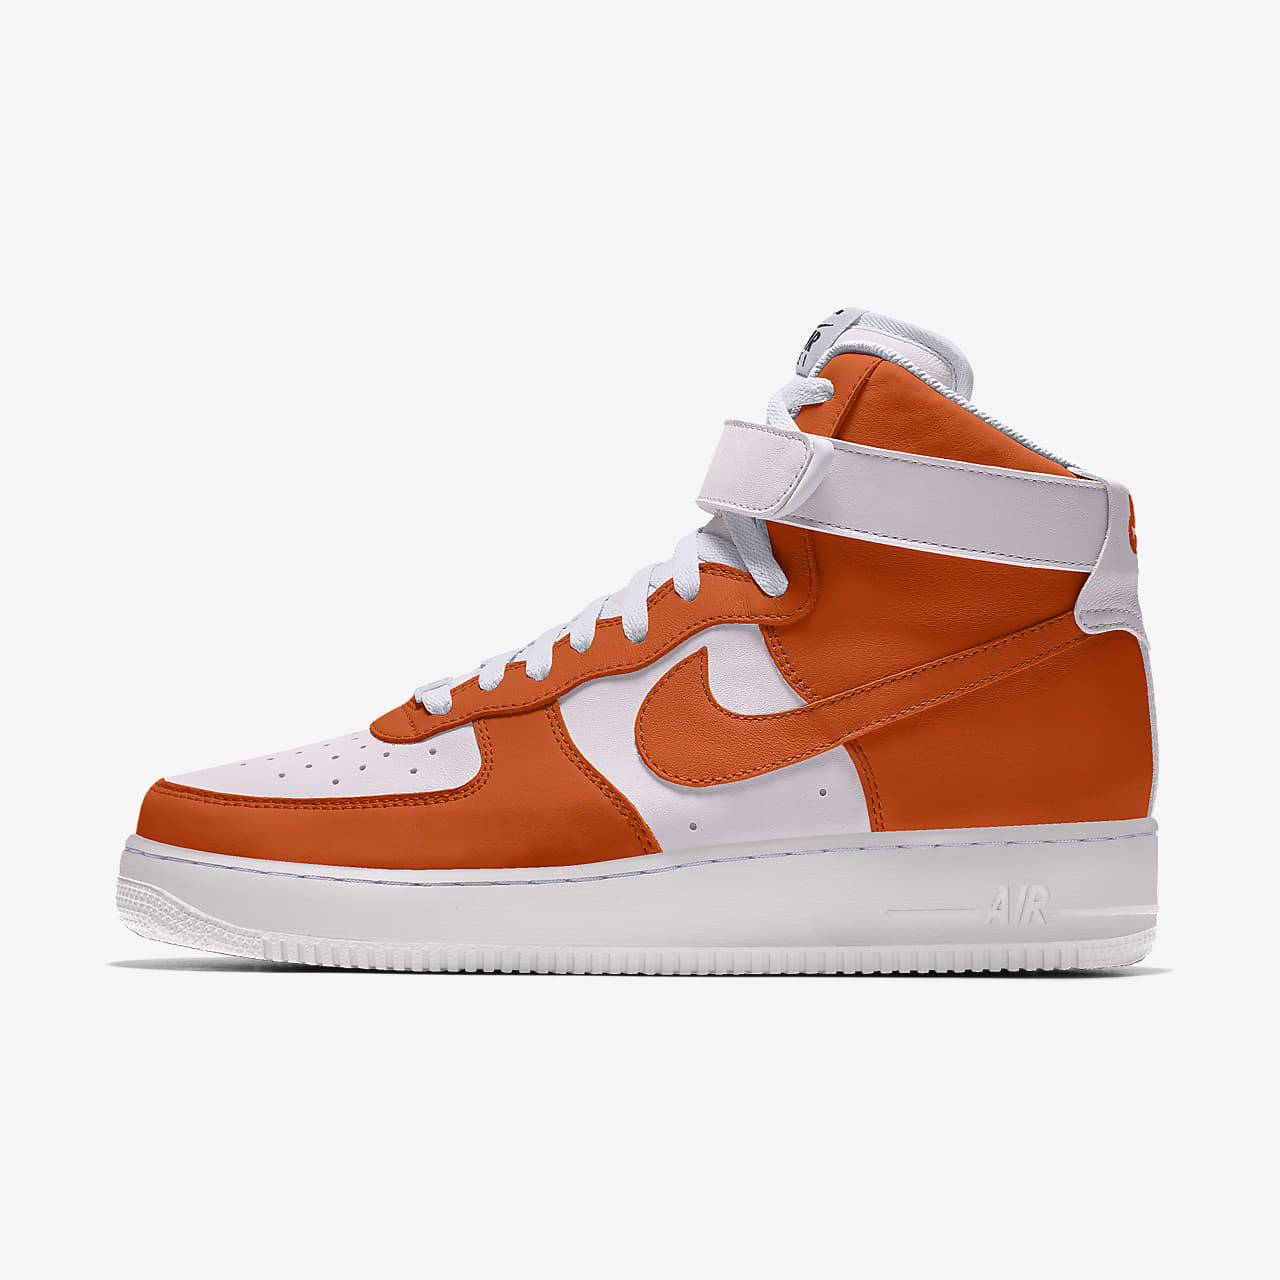 Lick Margaret Mitchell Thoroughly Nike Air Force 1 High By You Custom Women's Shoes. Nike.com